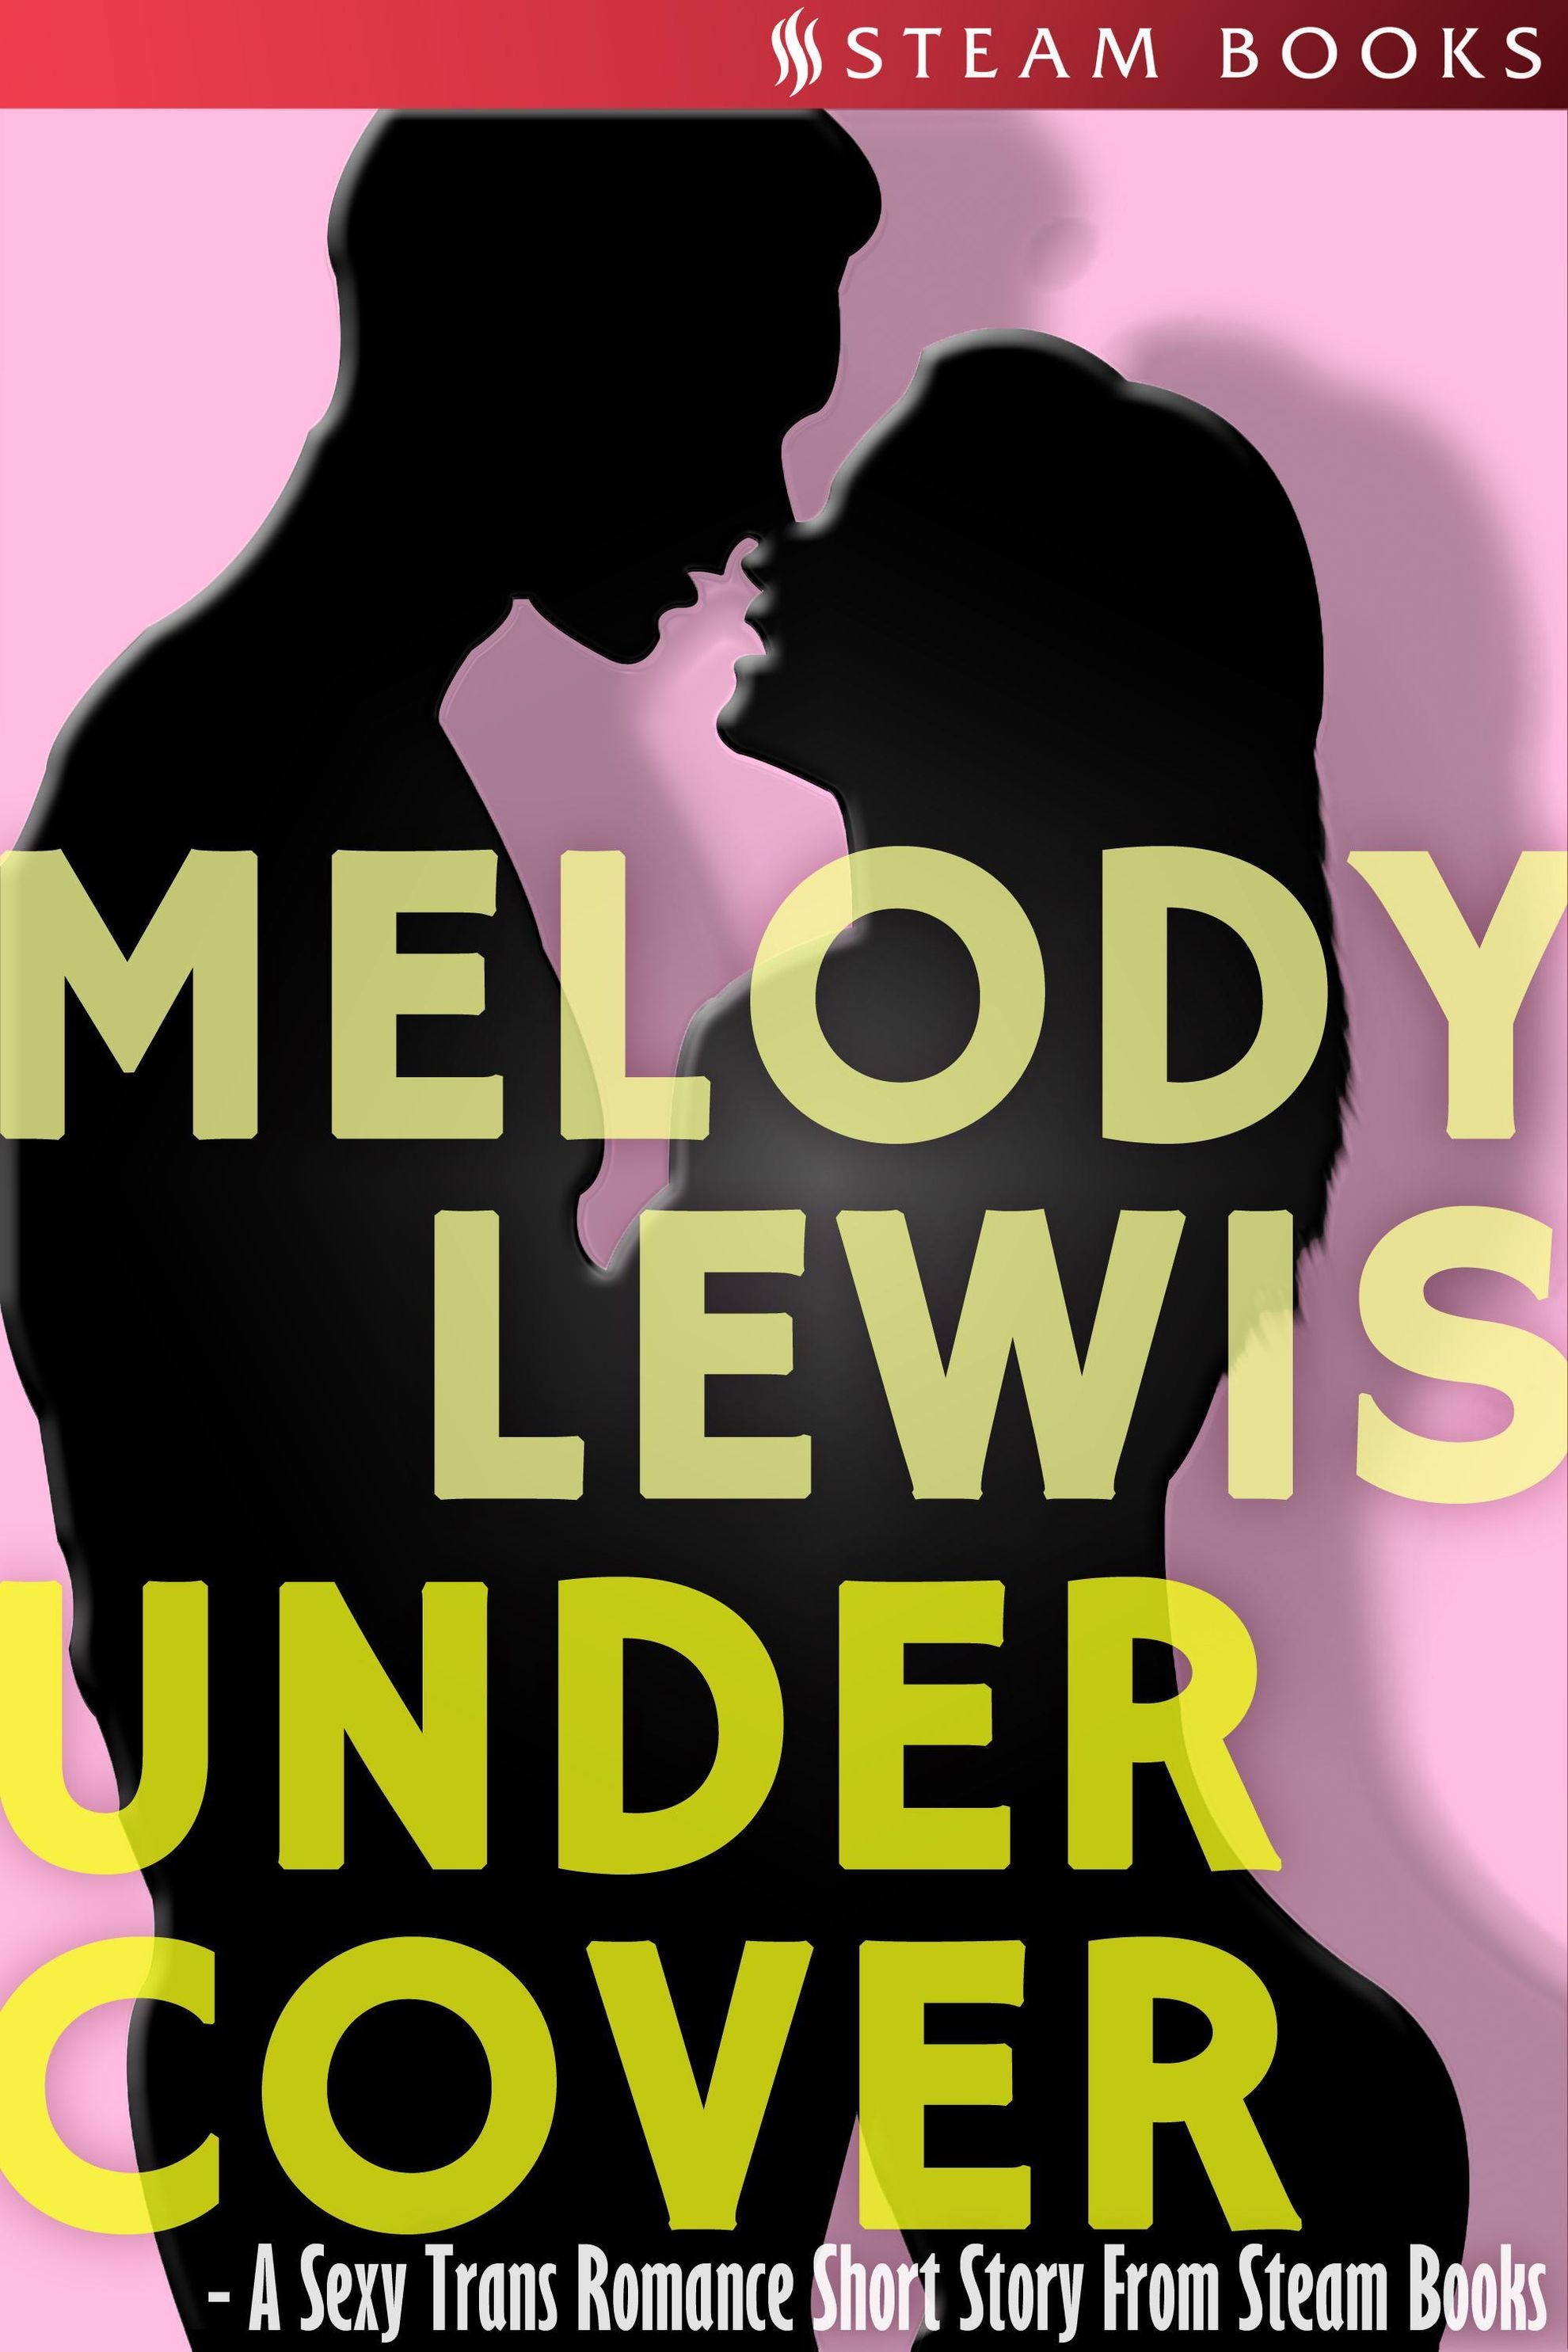 Undercover - A Sexy Trans Romance Short Story From Steam Books Steam Books  eBook v. Melody Lewis u. weitere | Weltbild